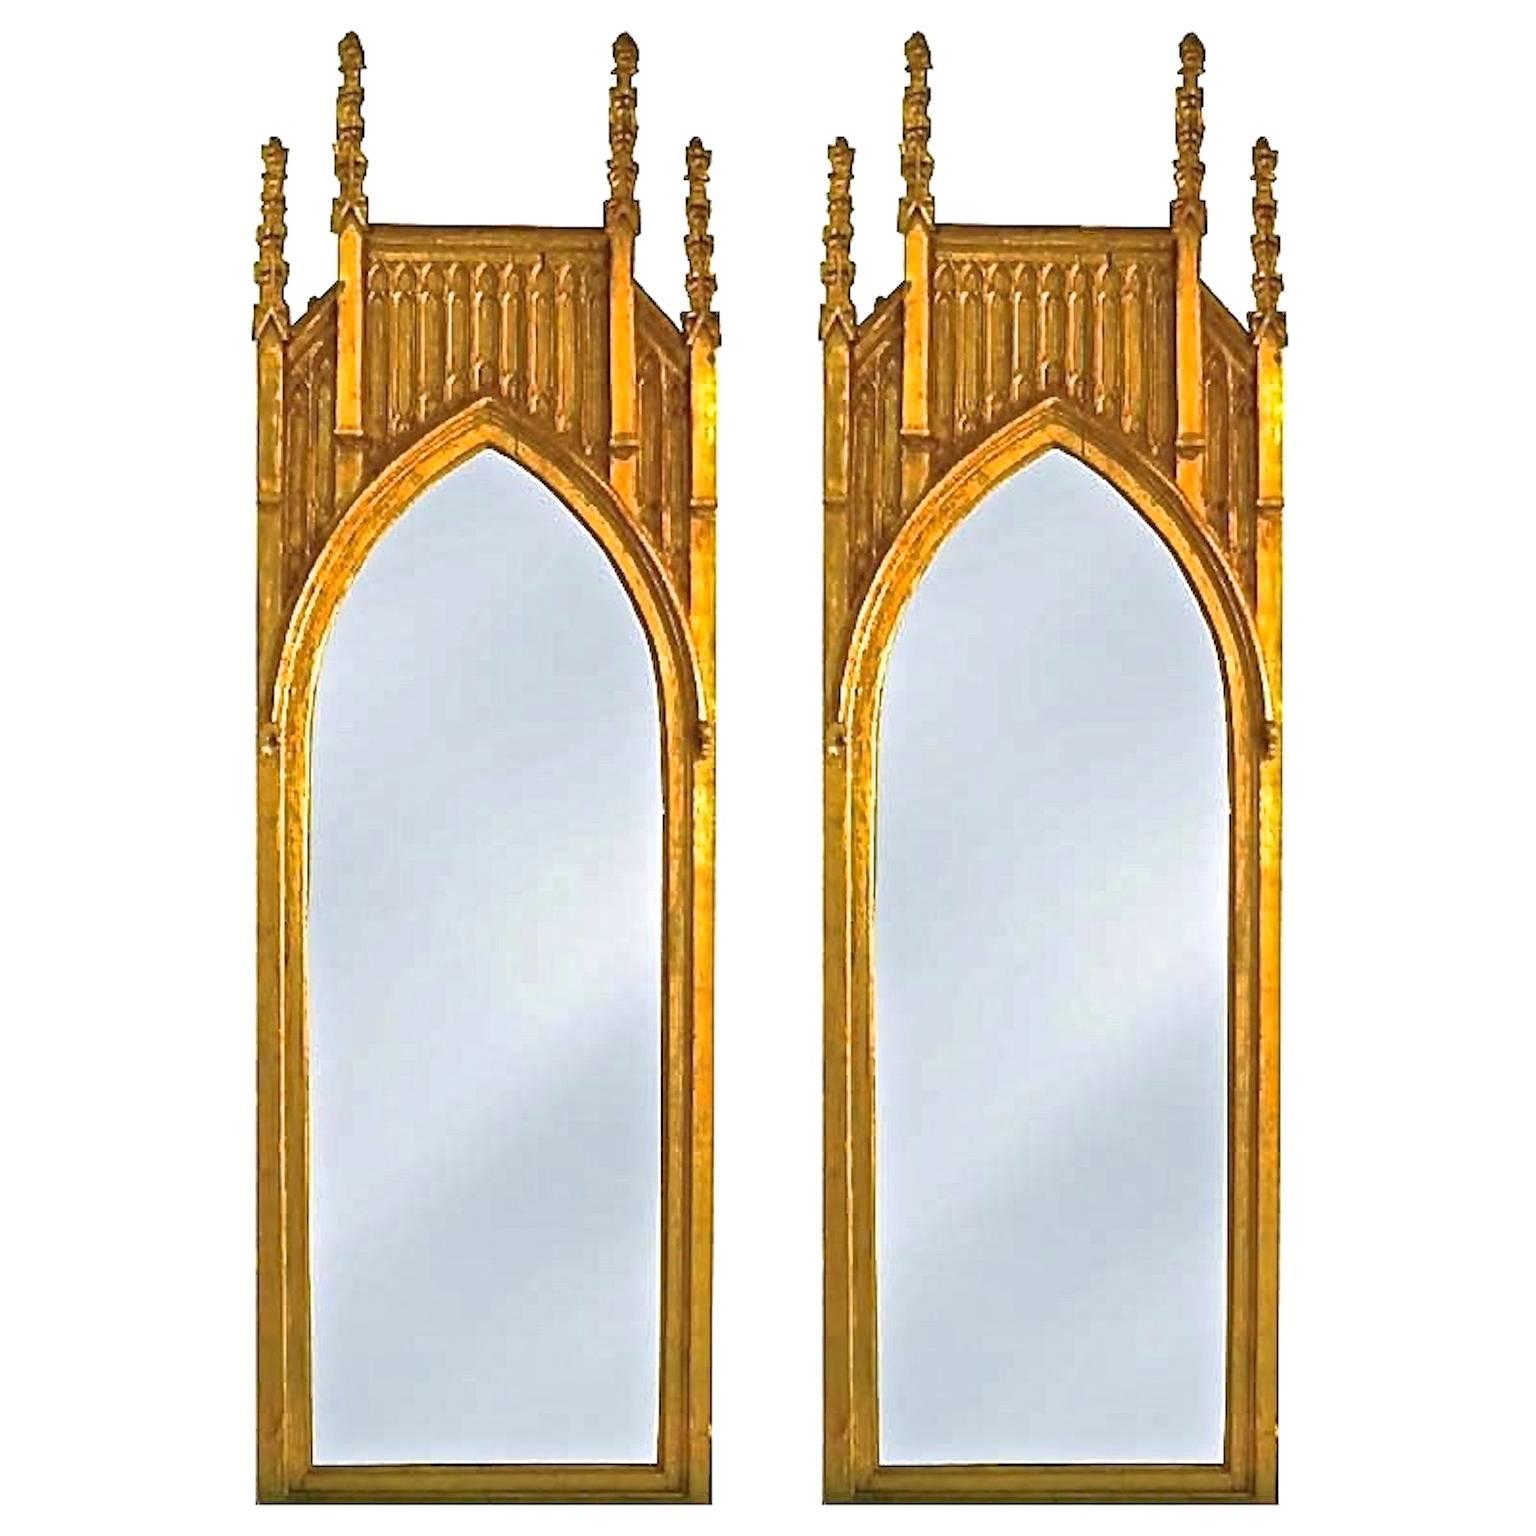 Pair of English Gothic Architectural Giltwood Mirrors ~9 feet tall